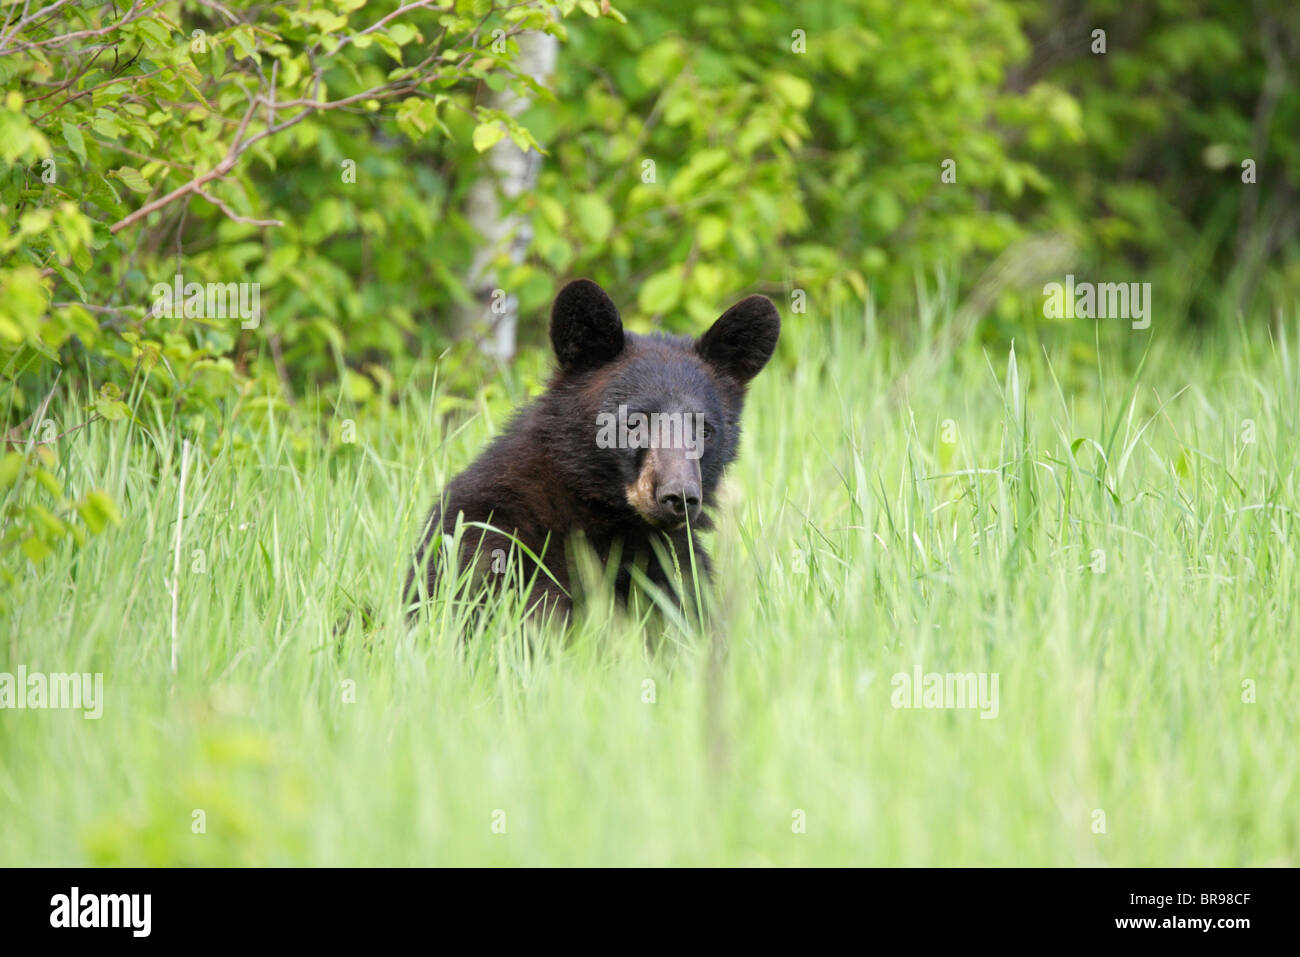 Black Bear Ursus americanus yearling cub sitting in long grass with eye contact Stock Photo